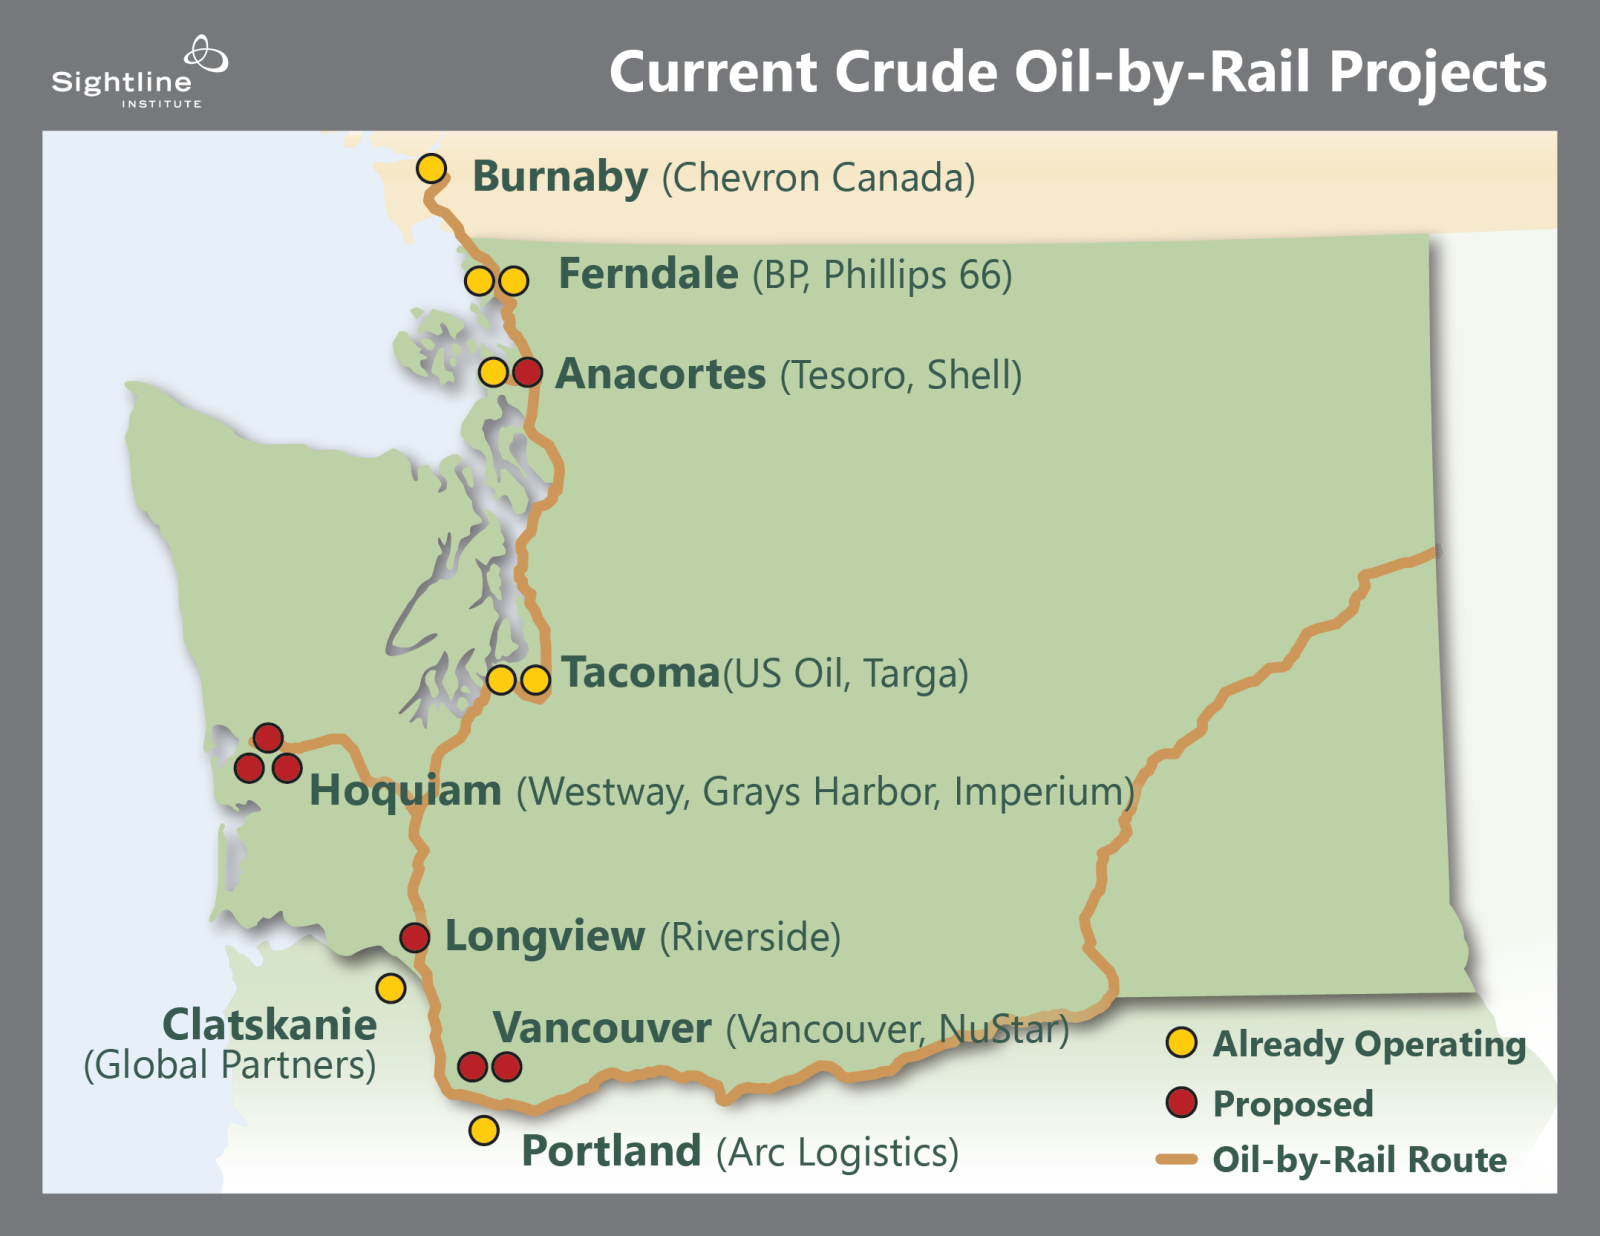 pnw-oil-by-rail-projects-map.-sightline-institute-july-2015.png